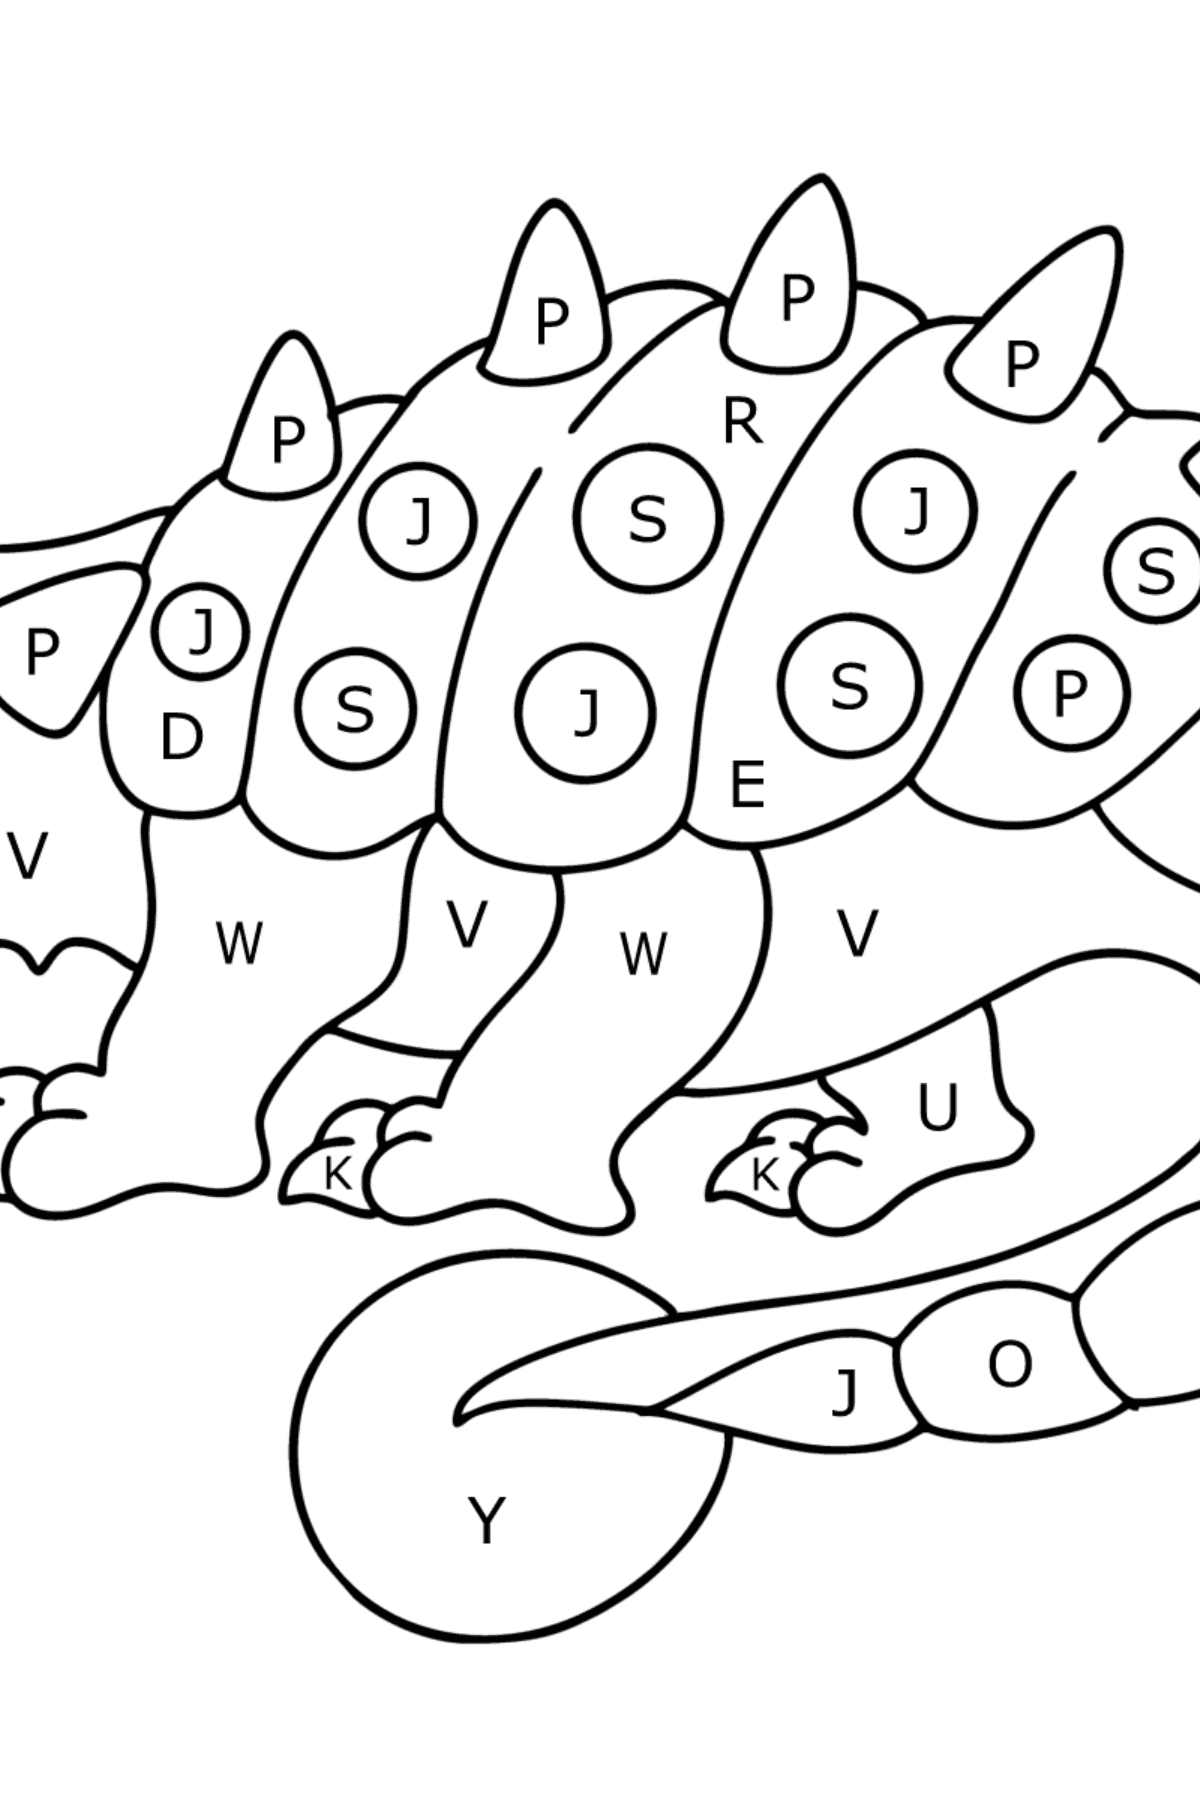 Ankylosaurus coloring page - Coloring by Letters for Kids